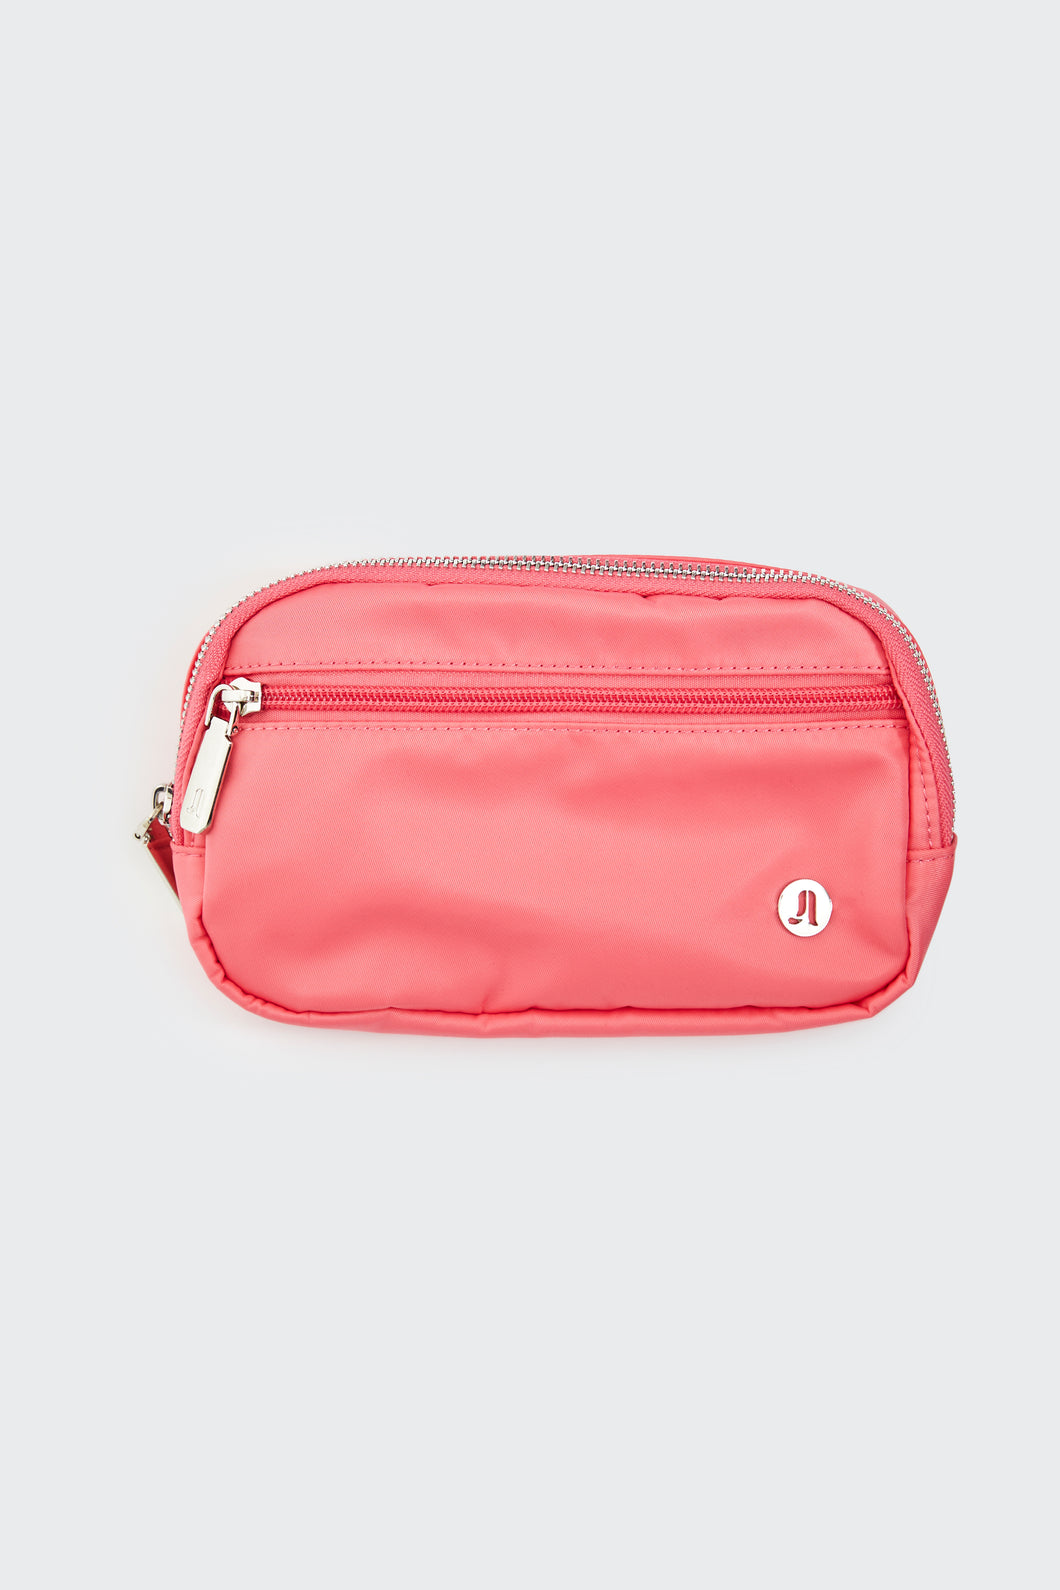 ADVENTURE FANNY PACK - PINK